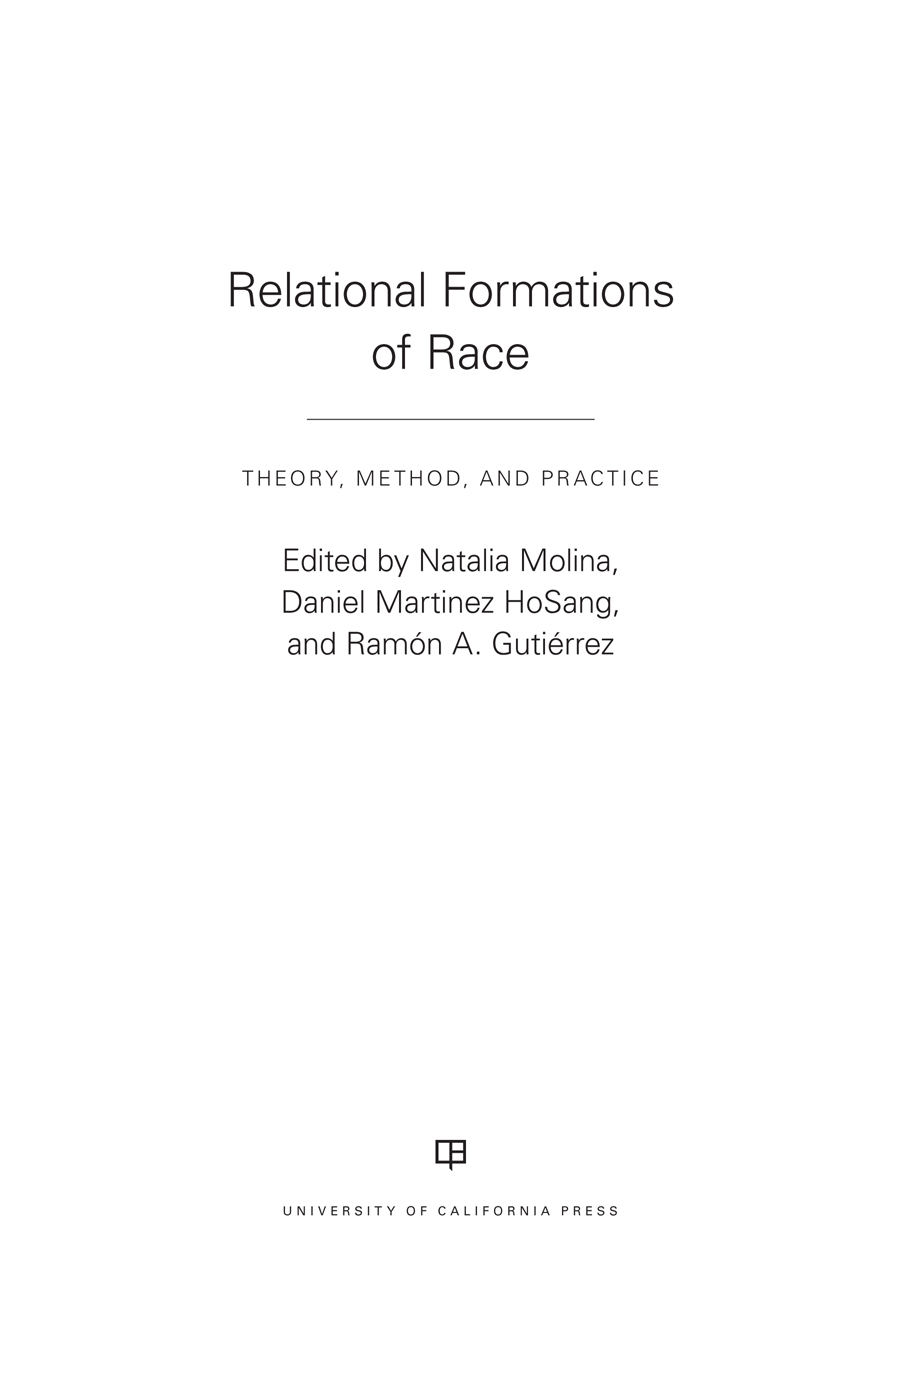 Relational Formations of Race Relational Formations of Race THEORY METHOD - photo 1